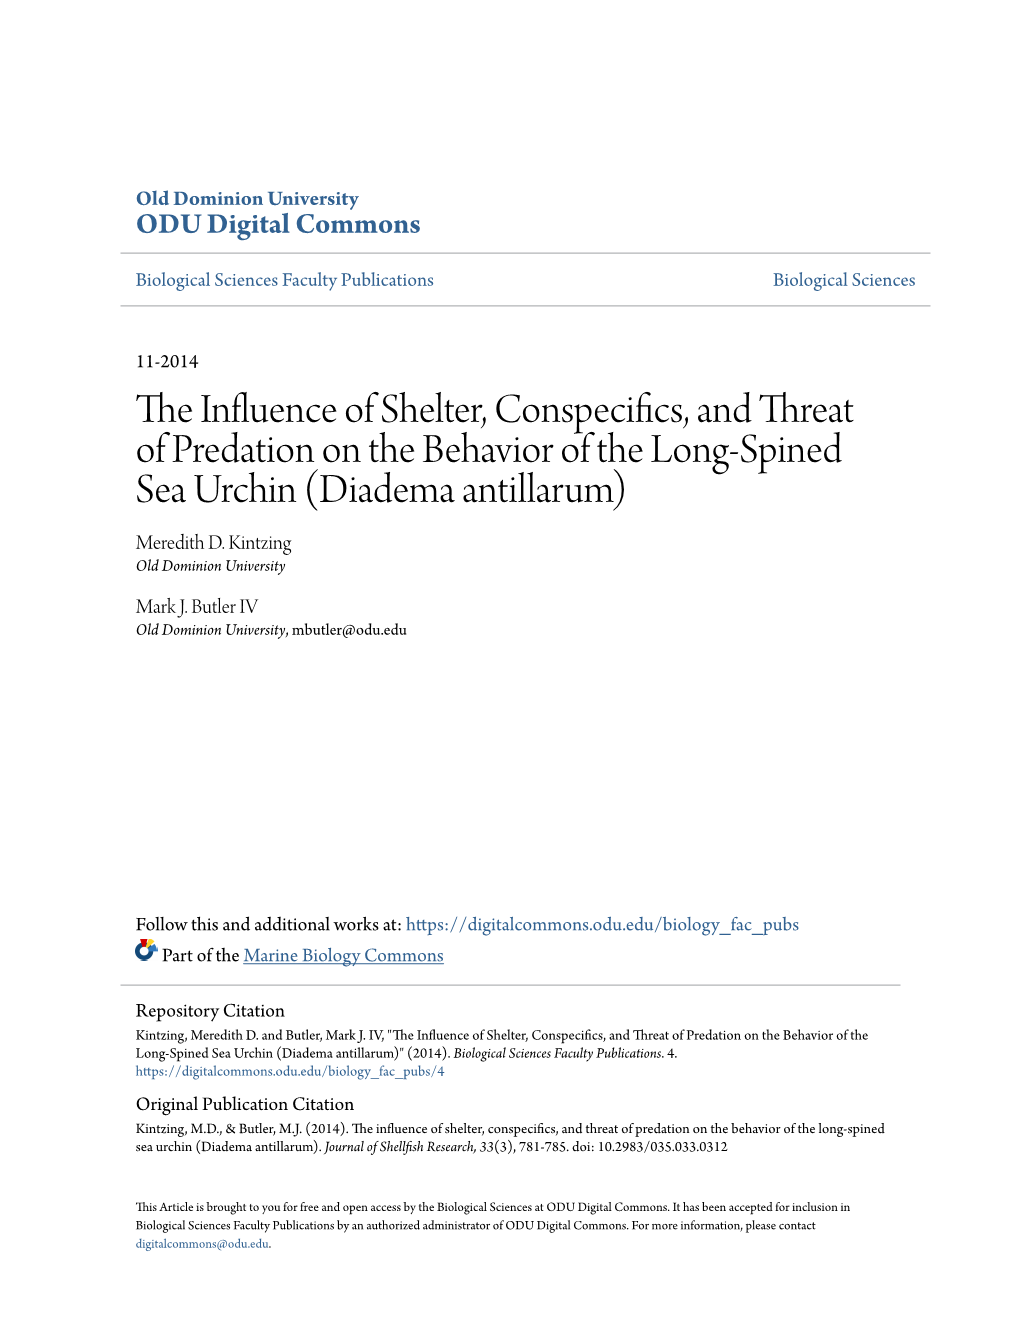 The Influence of Shelter, Conspecifics, and Threat of Predation on the Behavior of the Long-Spined Sea Urchin (Diadema Antillarum)